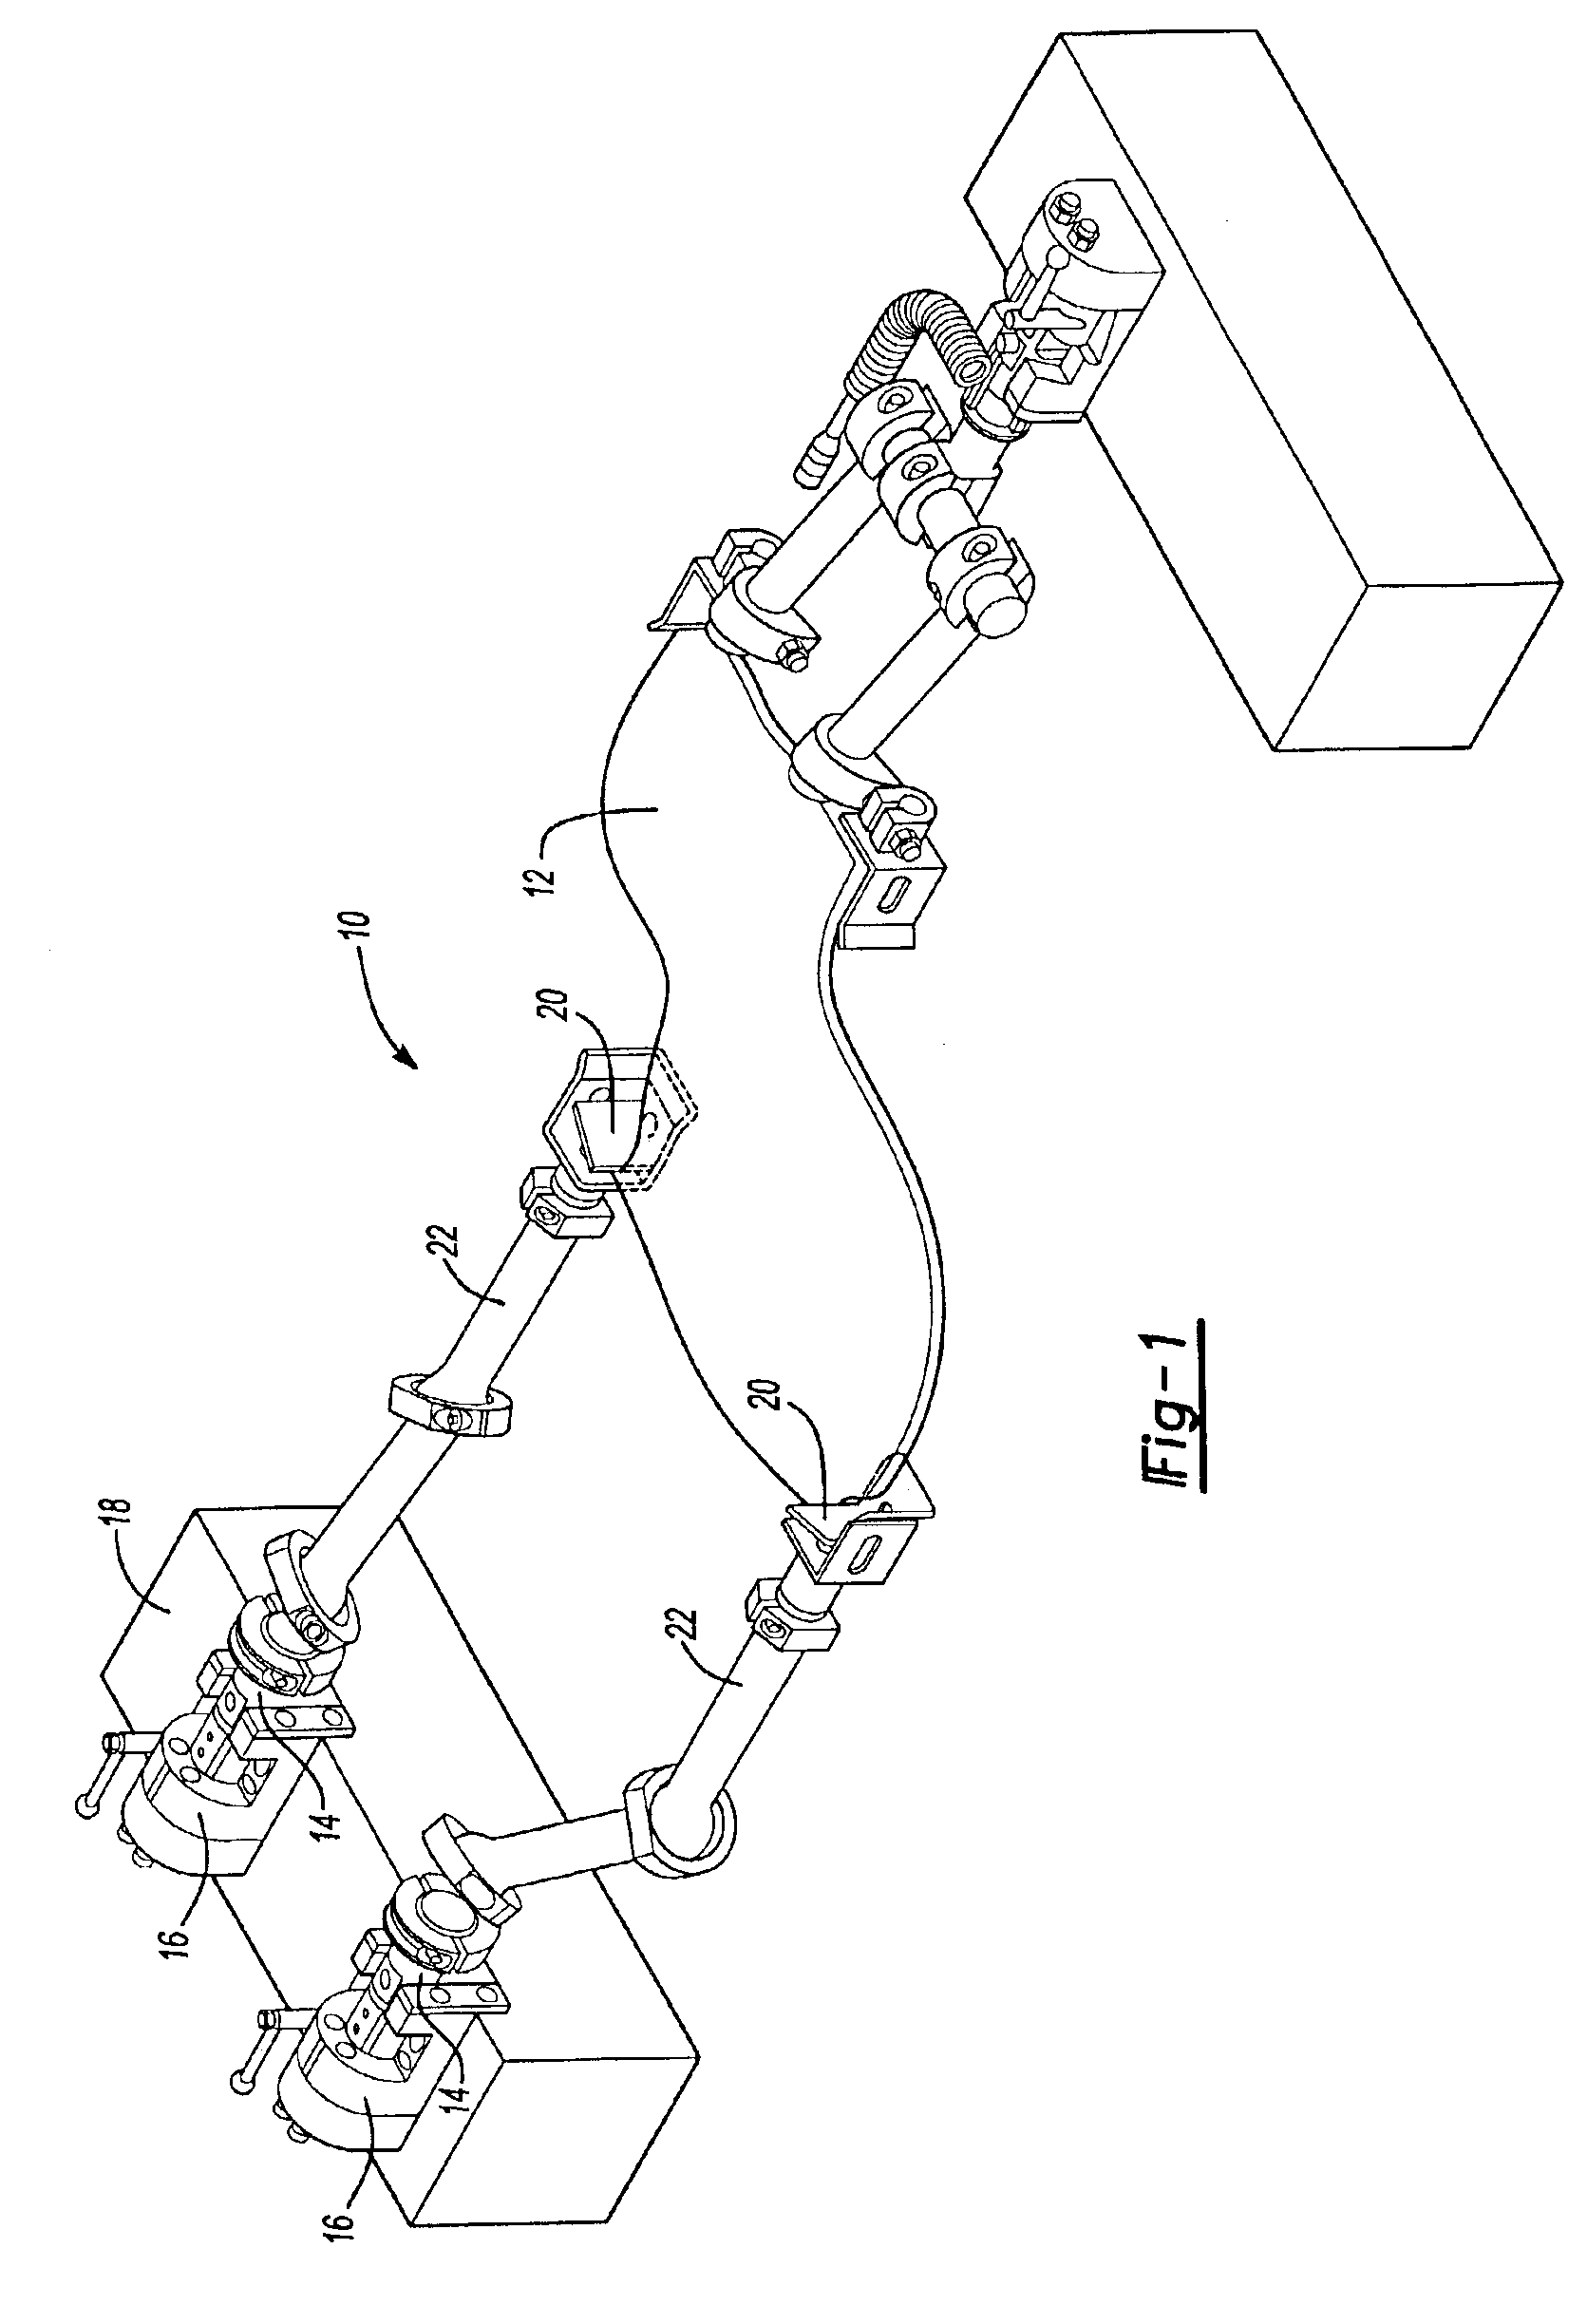 System and method for monitoring connections in a rail assembly